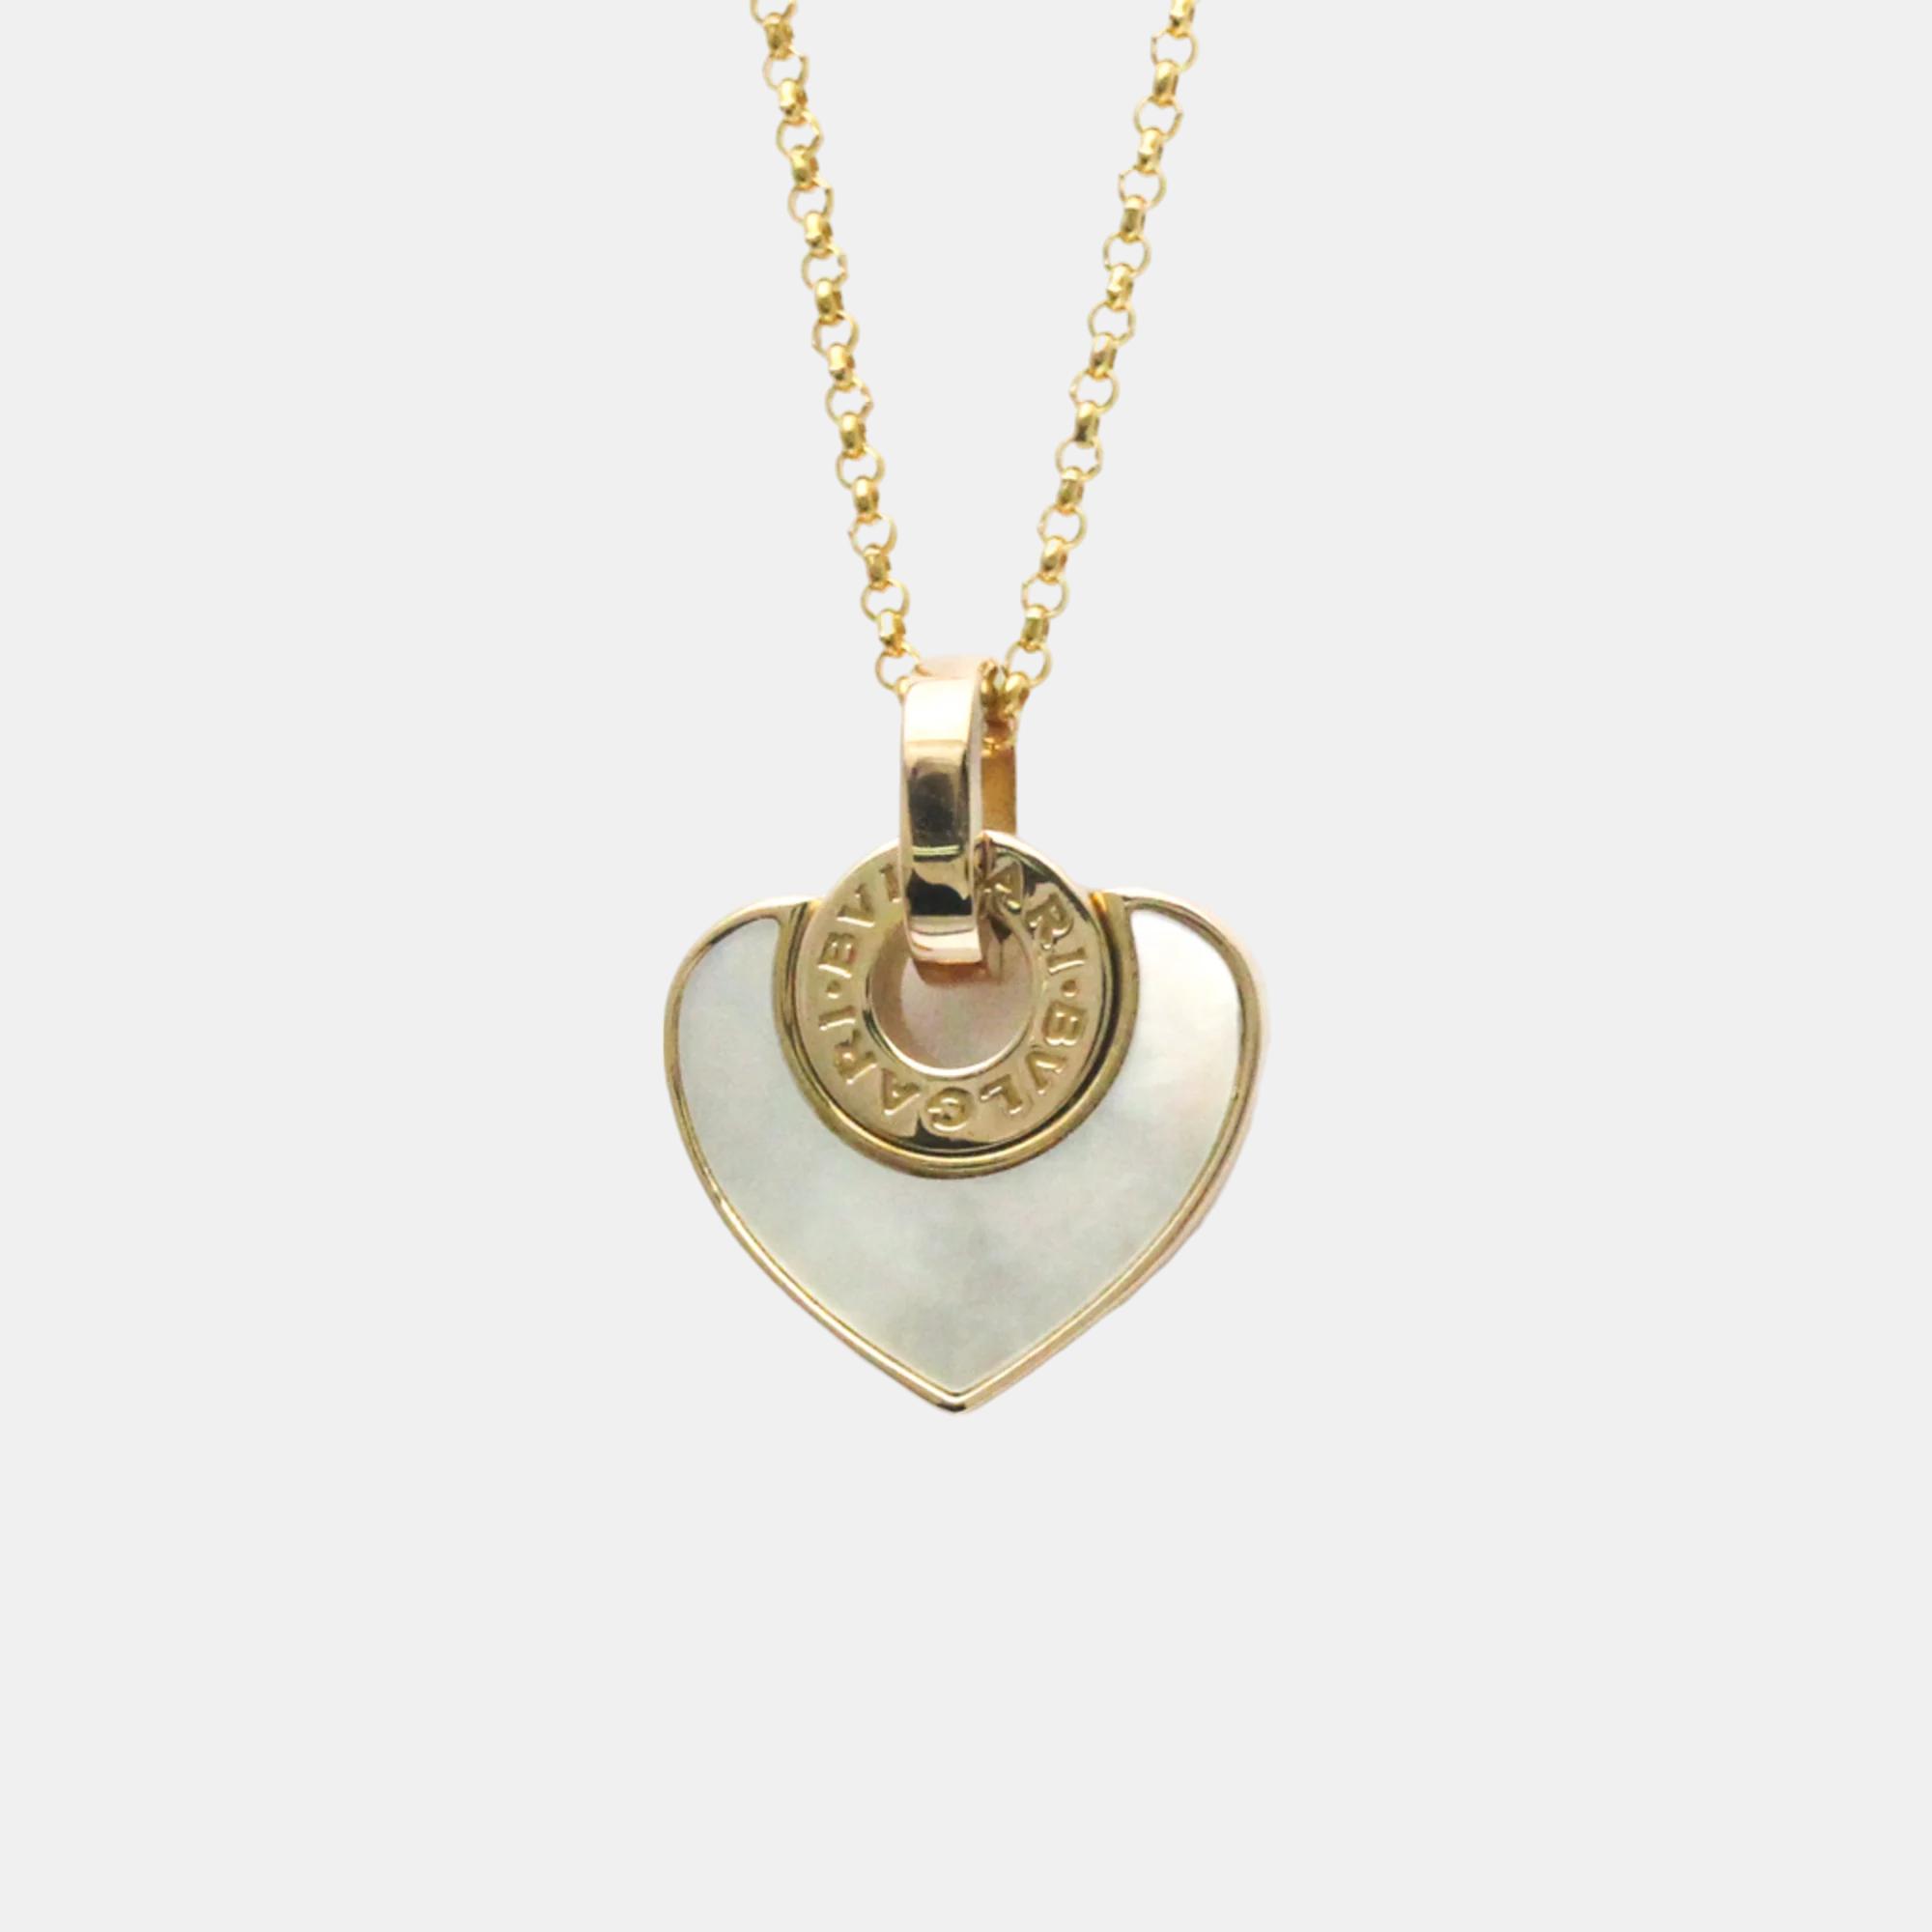 Bvlgari 18k rose gold mother of pearl cuore pendant necklace